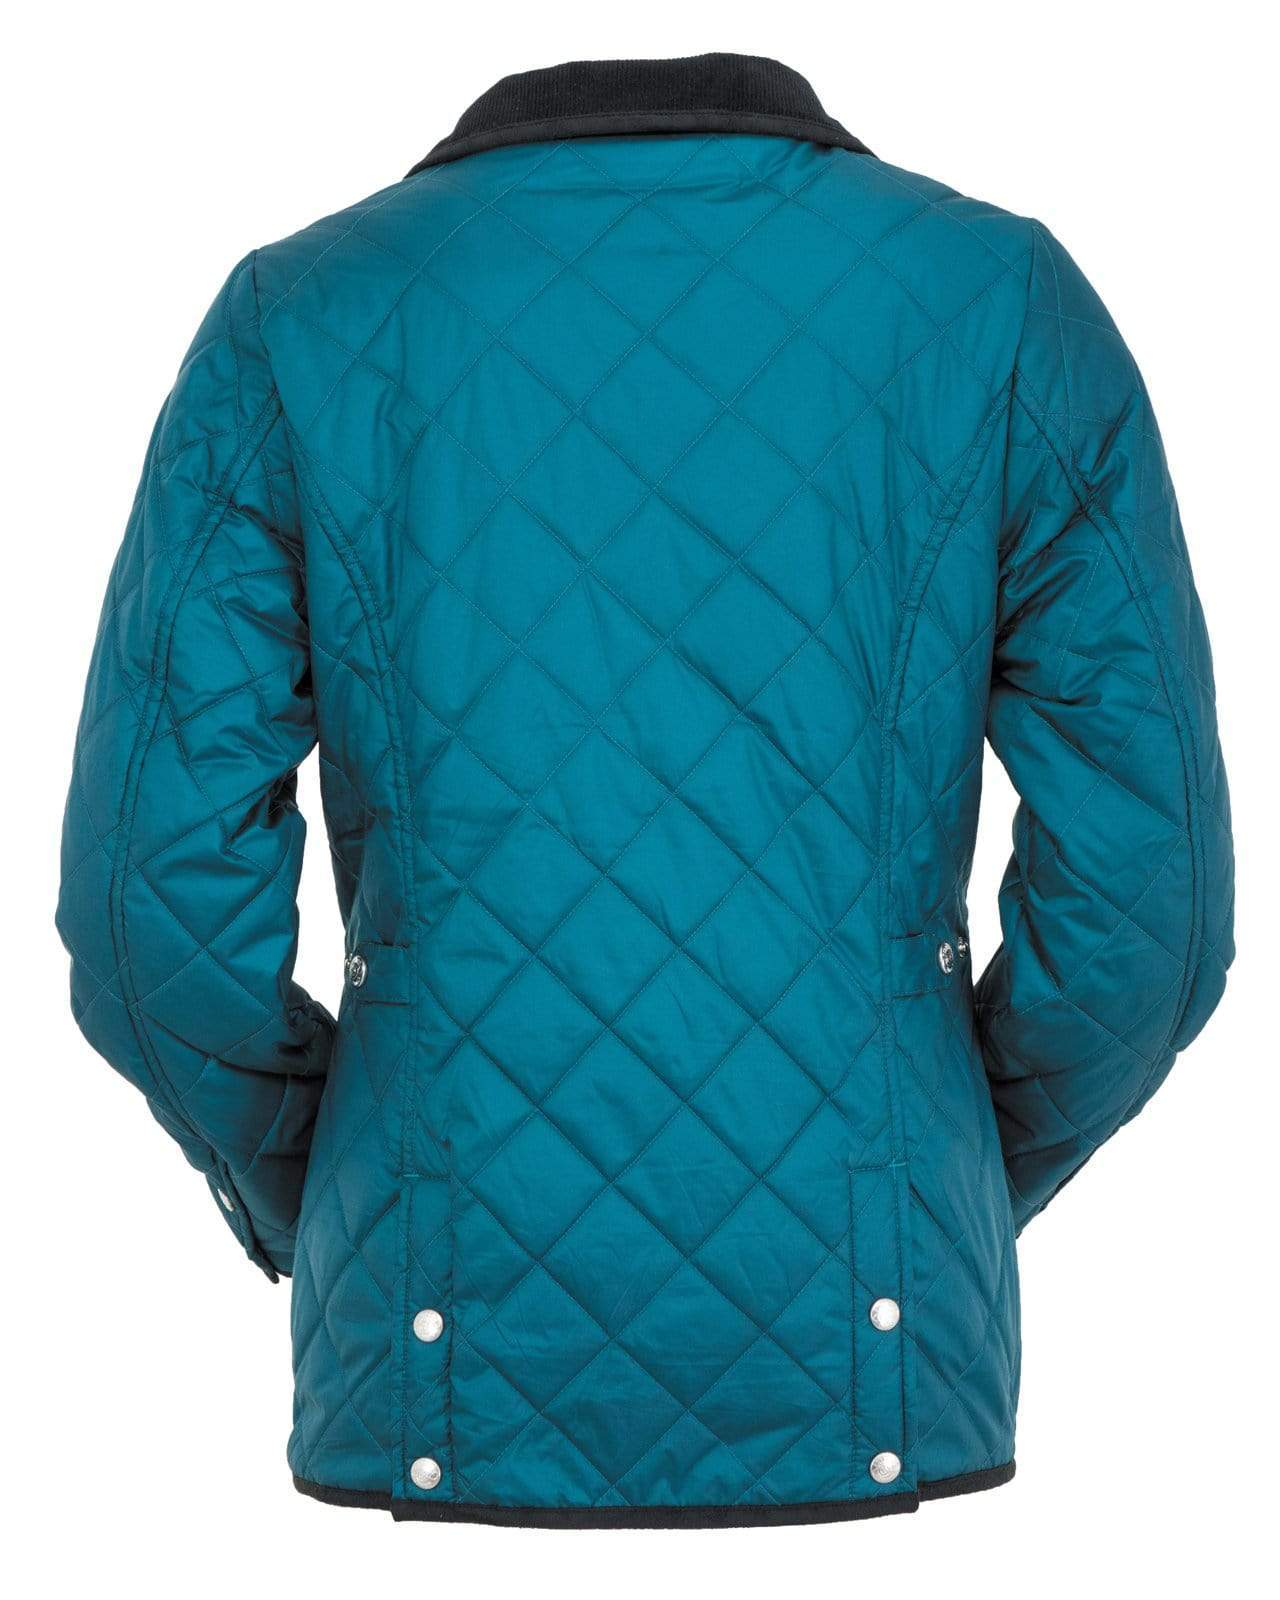 Outback Trading Company Women’s Barn Jacket Quilted